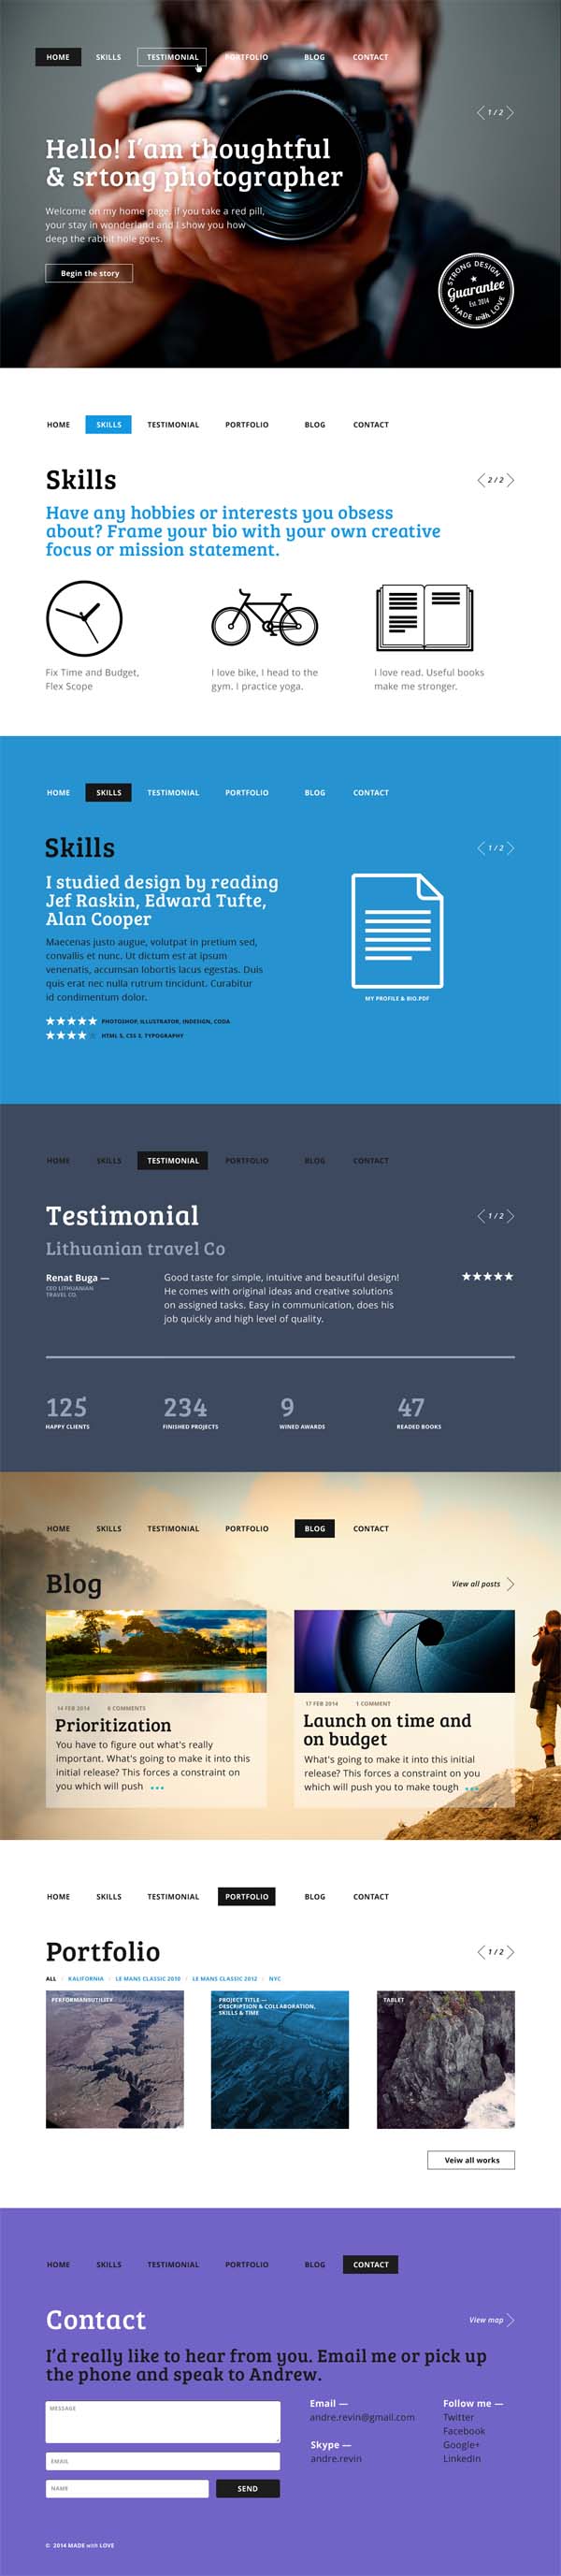 Redman one page psd template